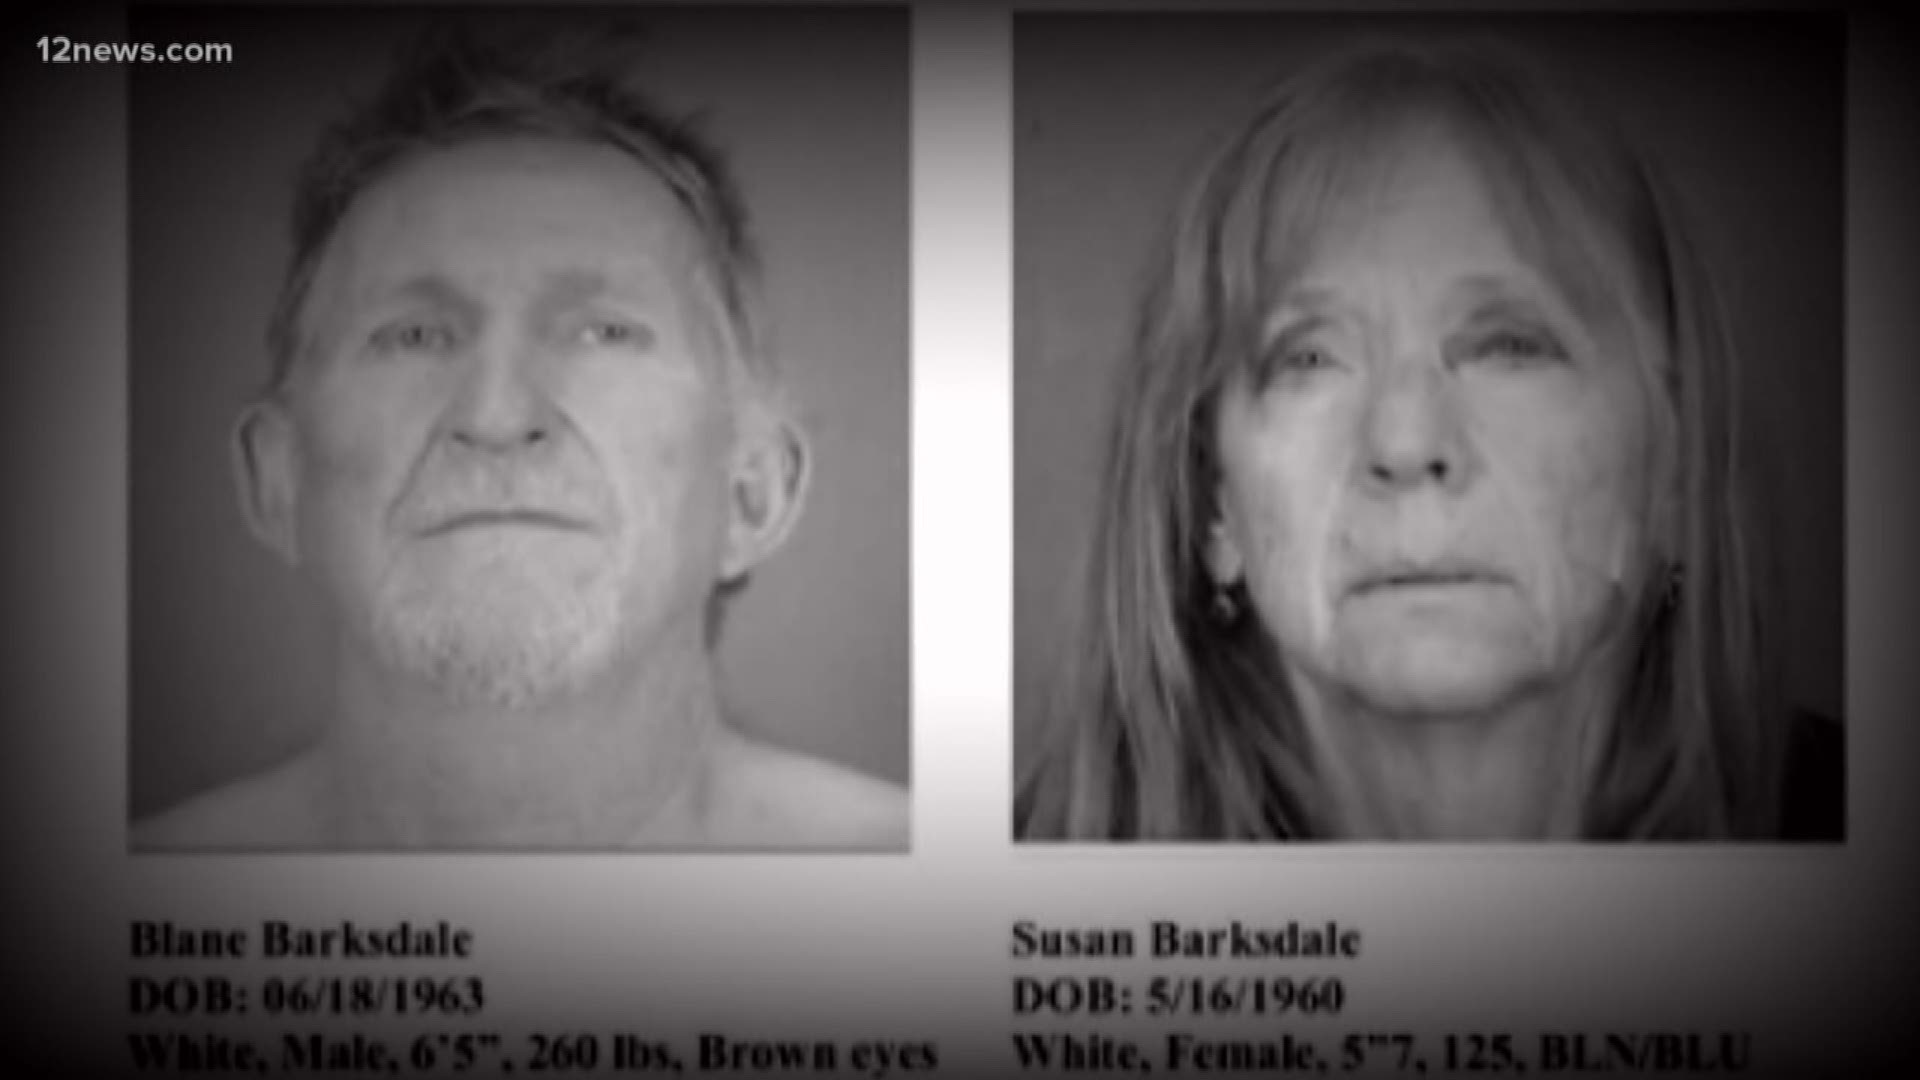 It's been two weeks since Blane and Susan Barksdale, a fugitive couple wanted for murder, escaped. The U.S. Marshals think the couple are in the Snowflake-Show Low area. The U.S. Marshals have now placed the couple on the top 15 Most Wanted list.